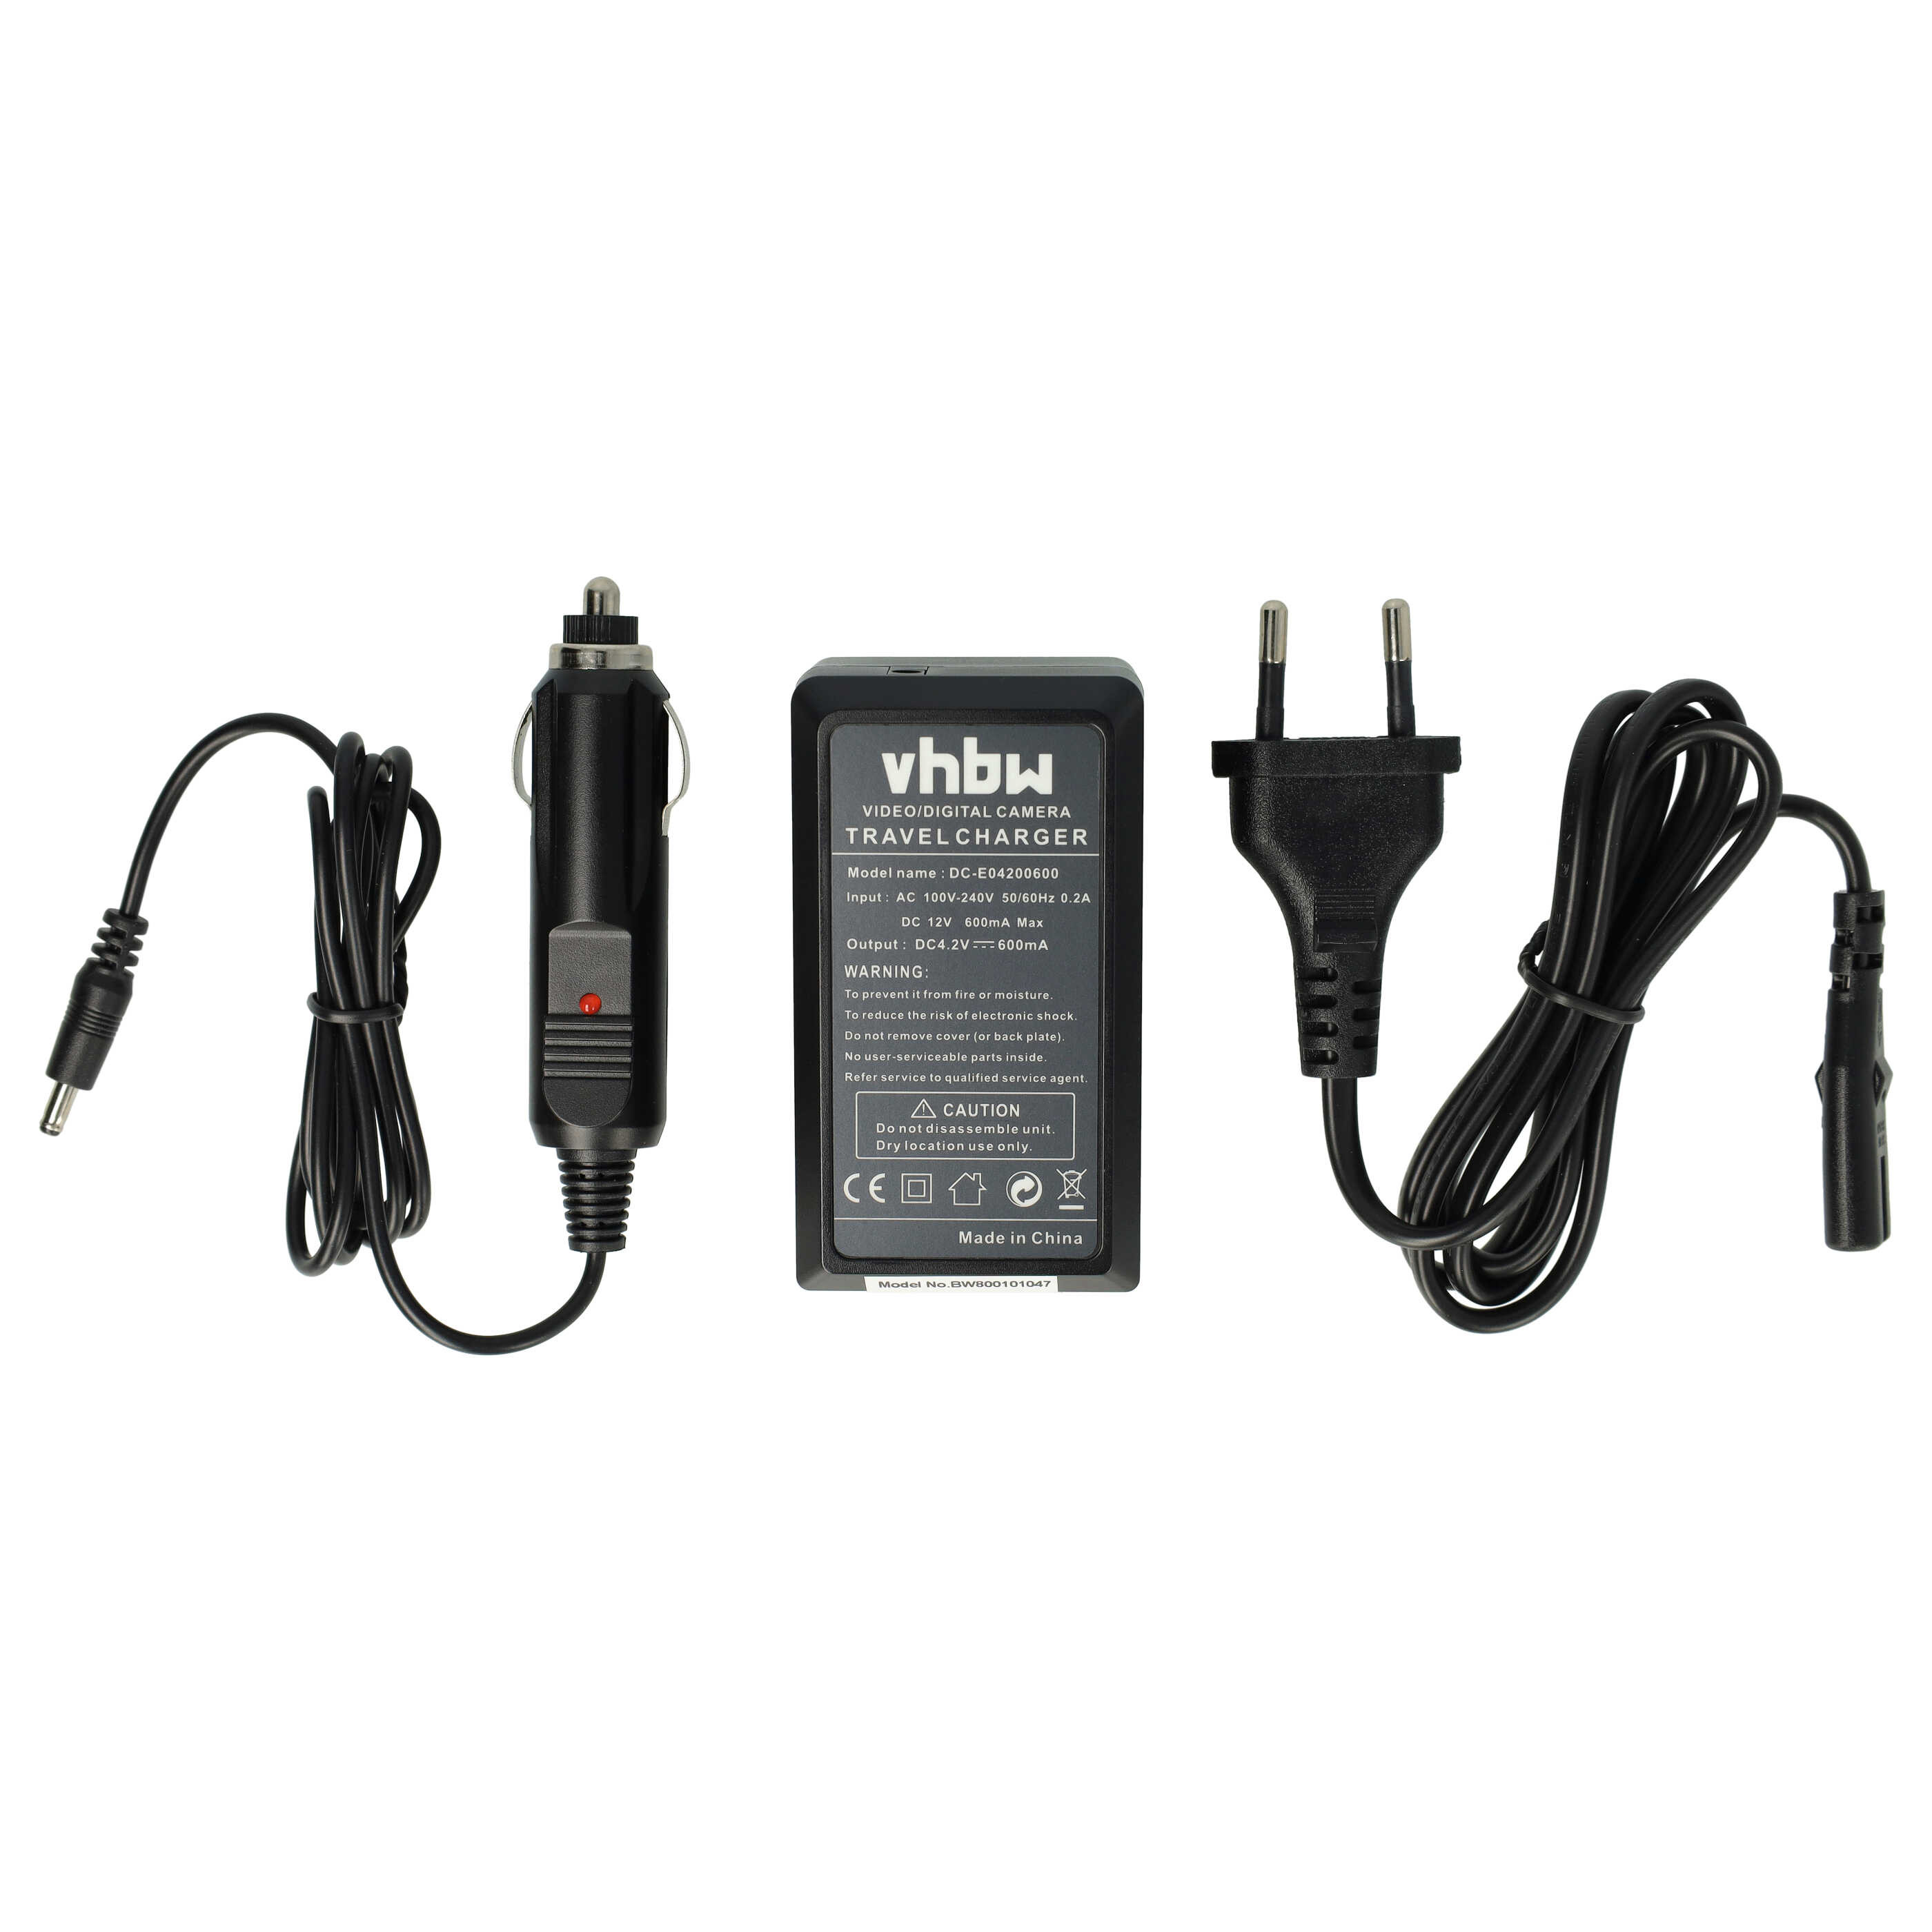 Battery Charger suitable for Lumix DMC-3D1 Camera etc. - 0.6 A, 4.2 V